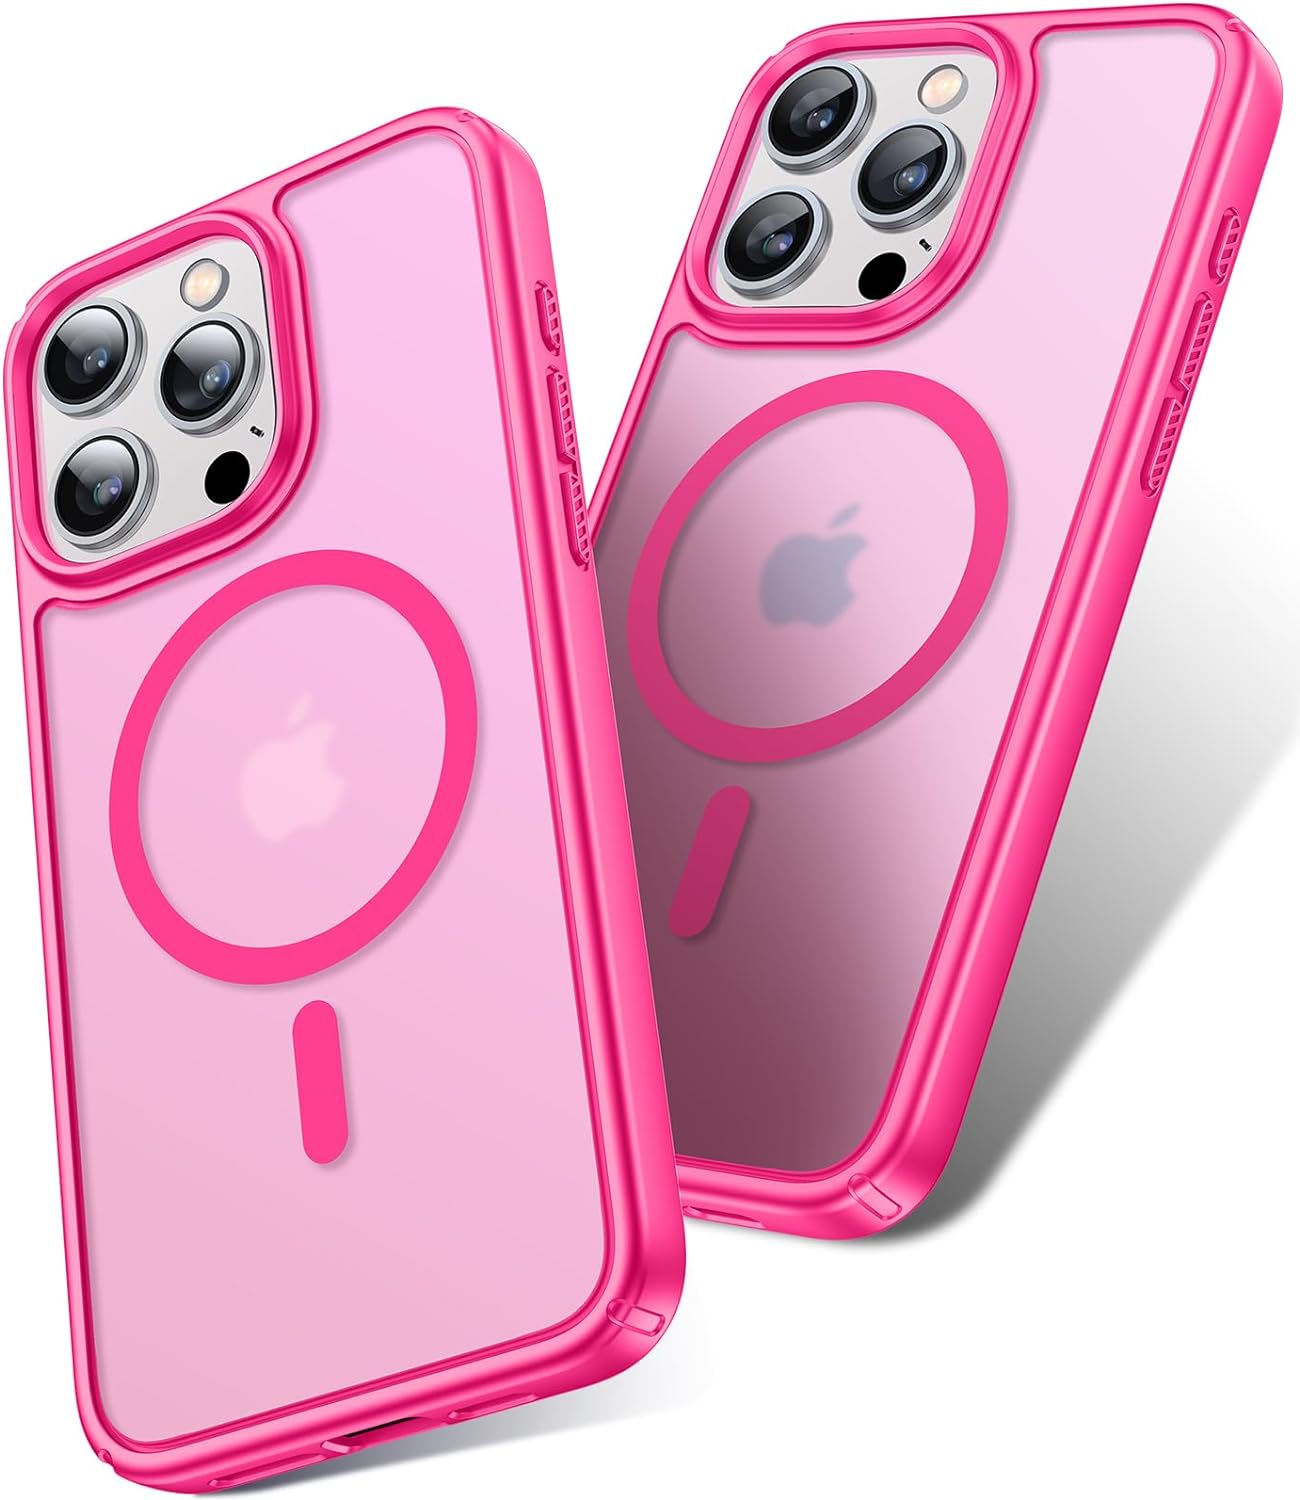 Humixx Magnetic for iPhone 15 Pro Max Case for Women, [14 FT Drop Protection] [Compatible with MagSafe] Translucent Matte Back Slim Thin Protective Phone Case for iPhone 15 Pro Max Case 6.7”, Pink